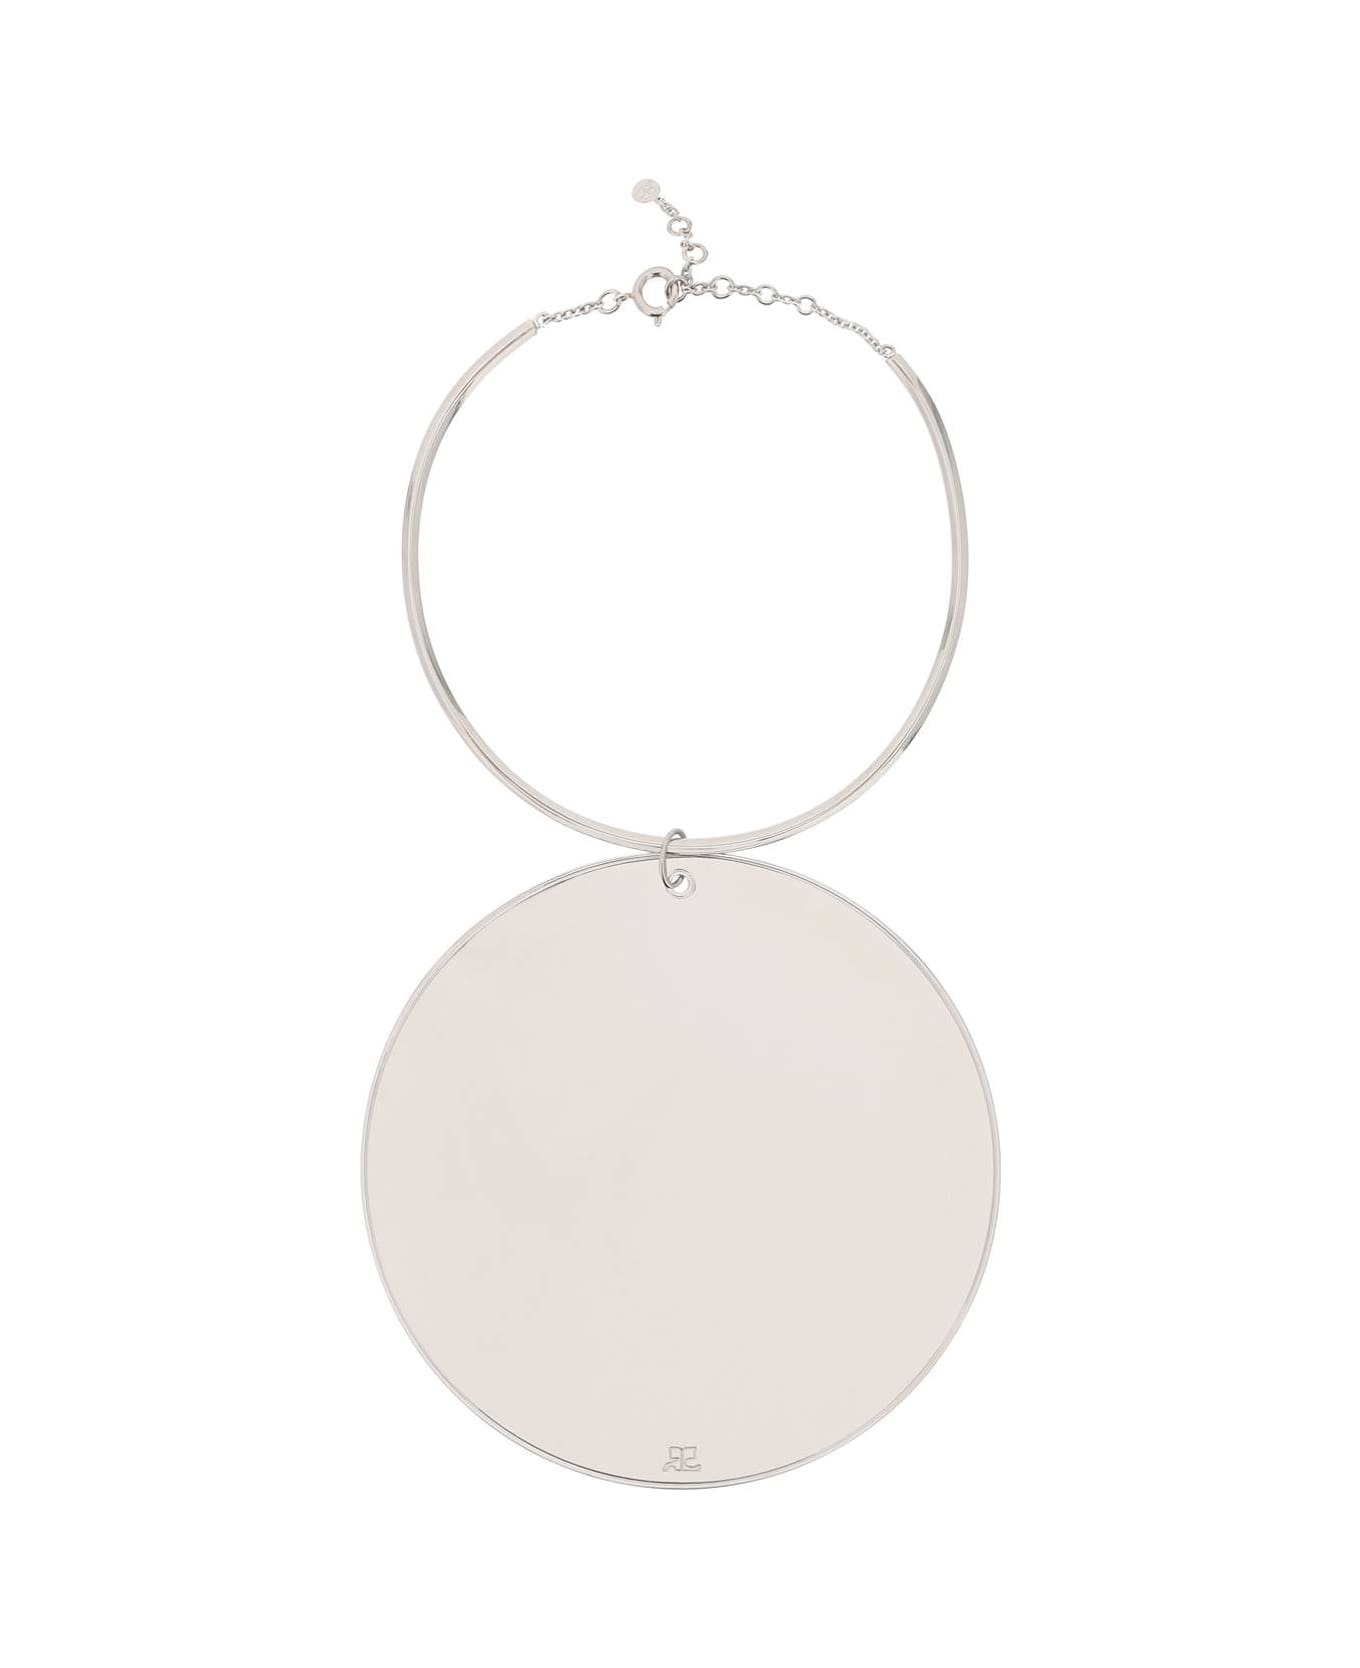 Courrèges Mirror Charm Necklace - SILVER (Silver)